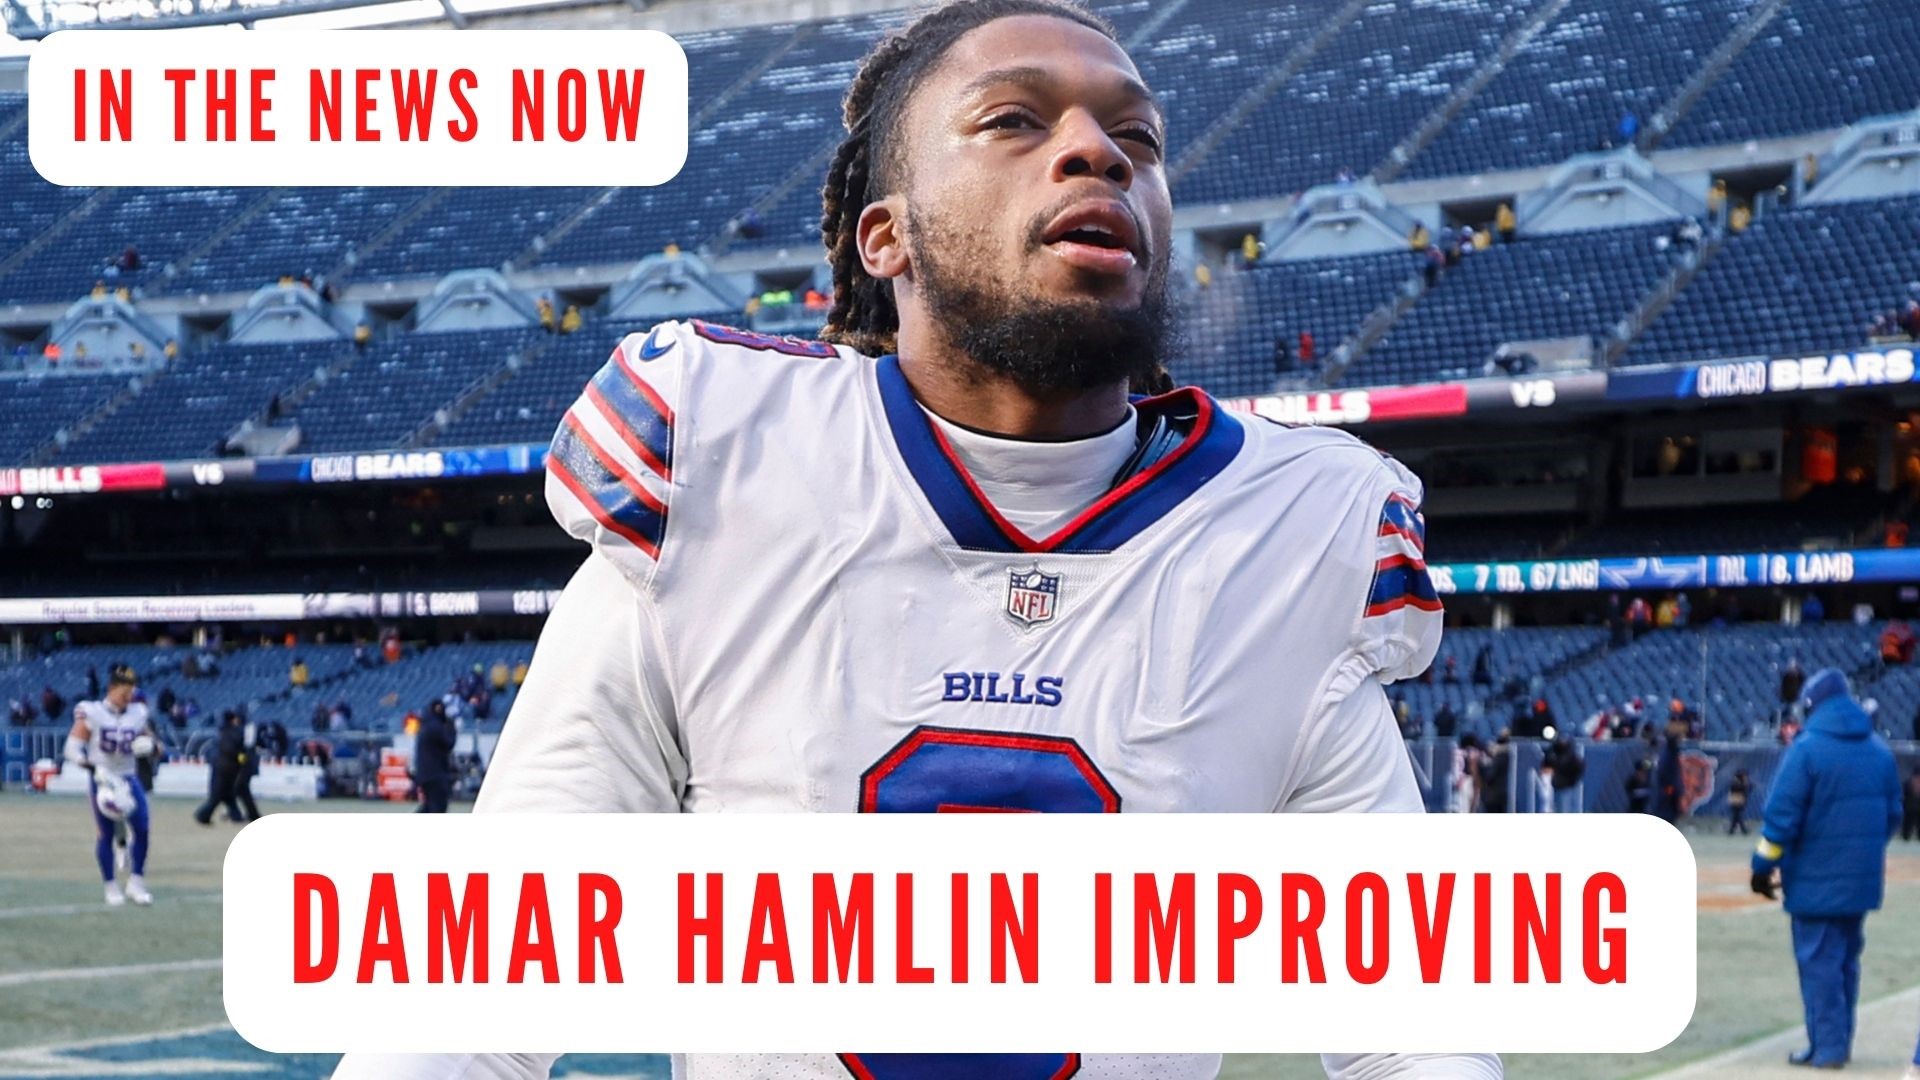 Damar Hamlin's collapse is the latest in history of medical